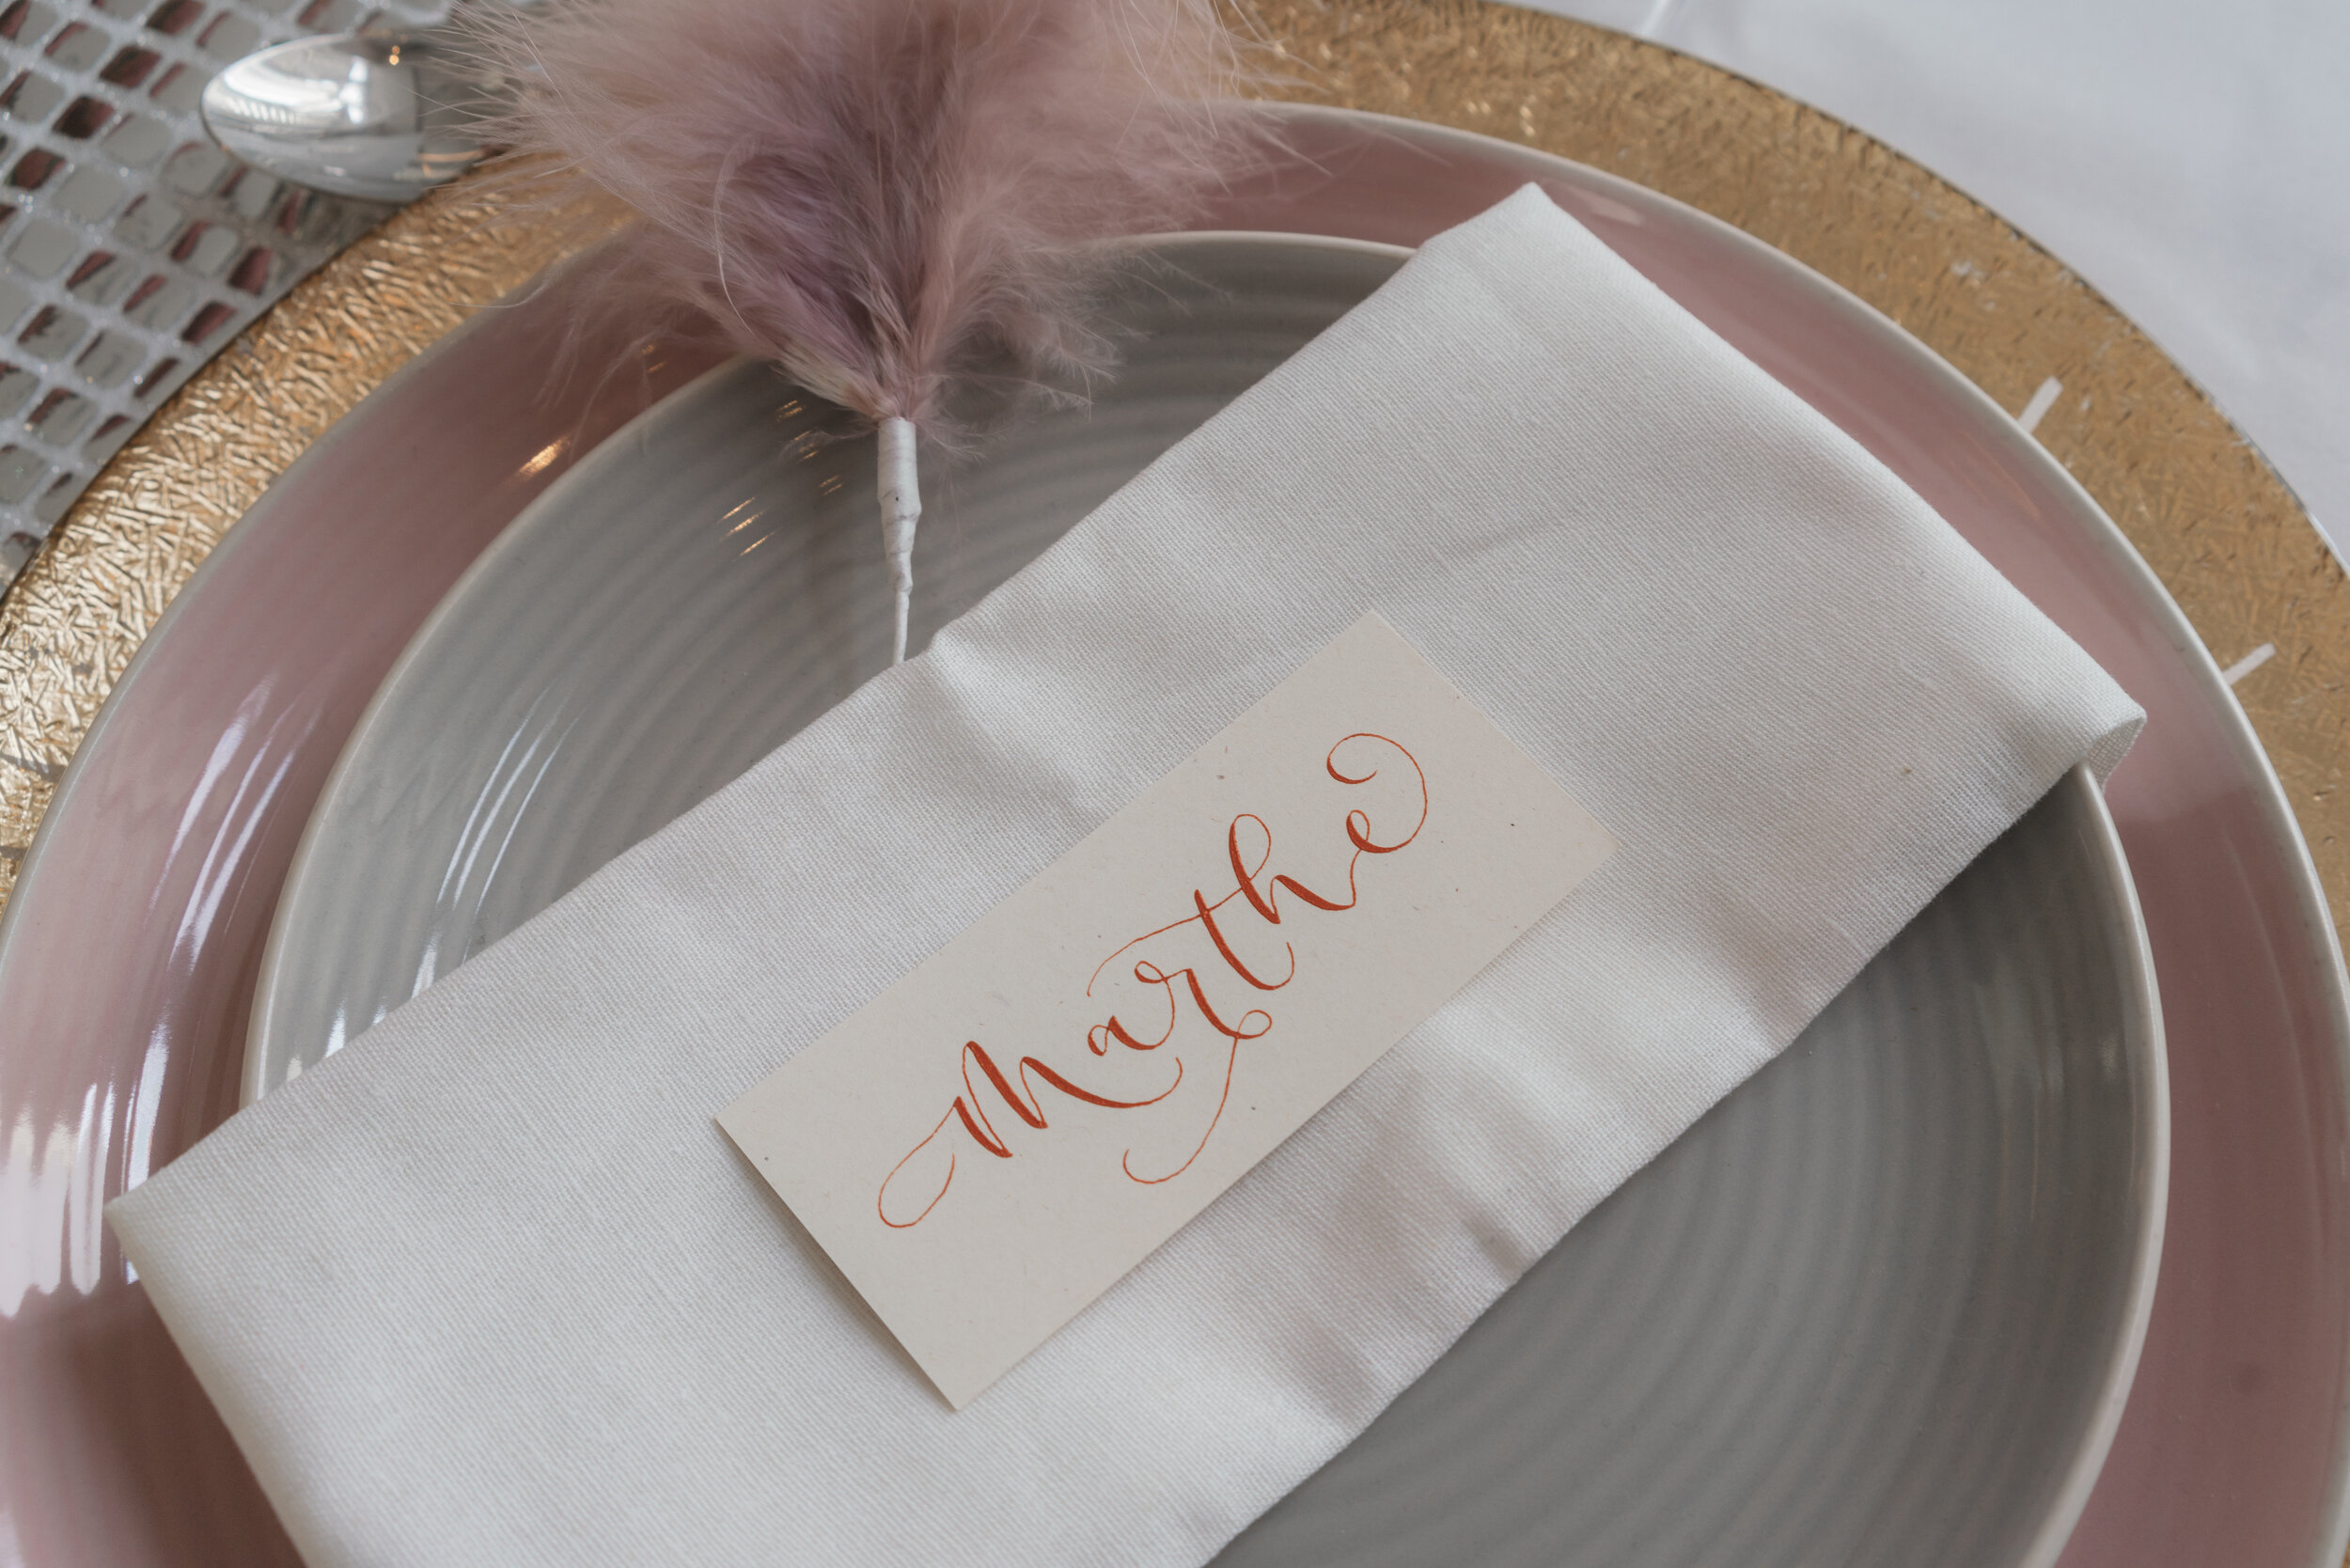 Pink and copper eco friendly wedding stationery created with copper calligraphy ink on flecked recycled paper.jpg